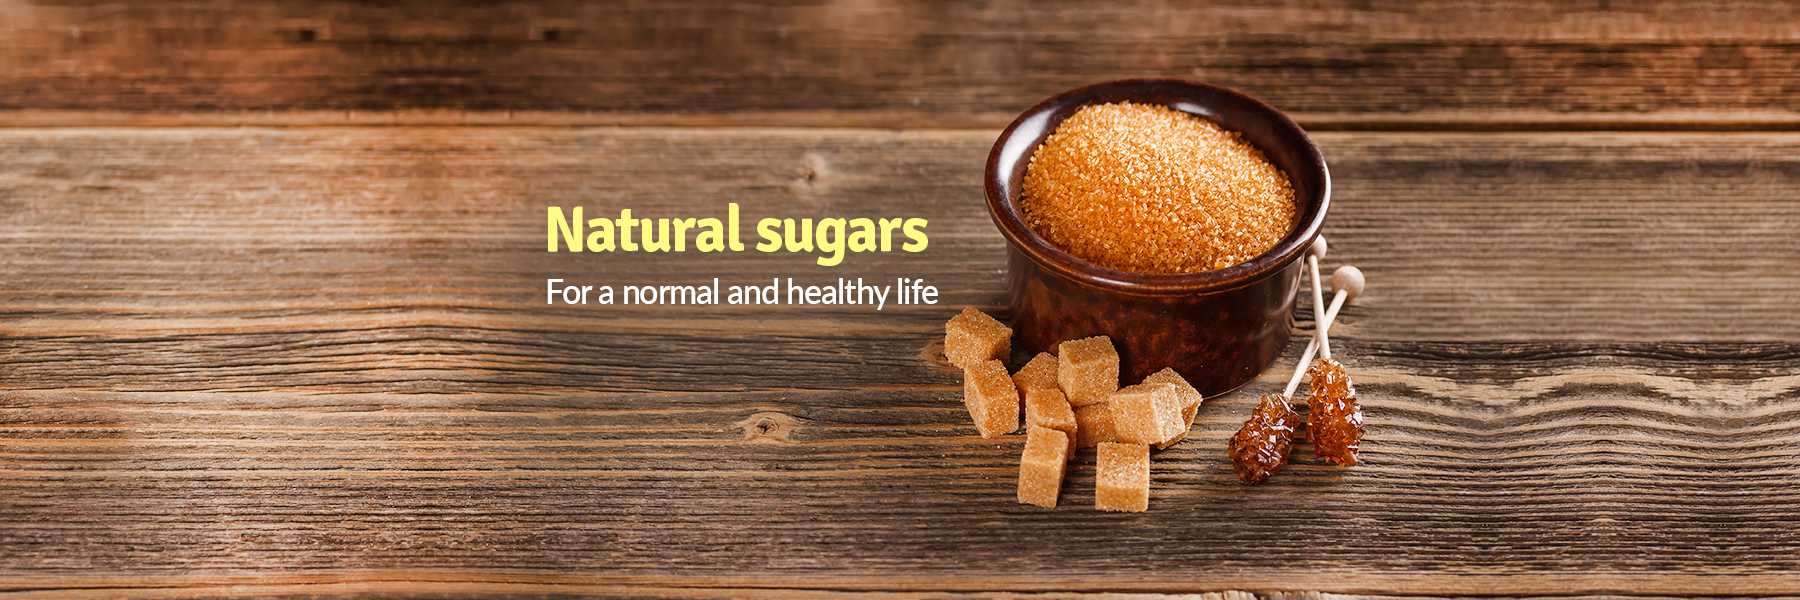 Natural Sugars - For a normal and healthy life. FromIndia.com